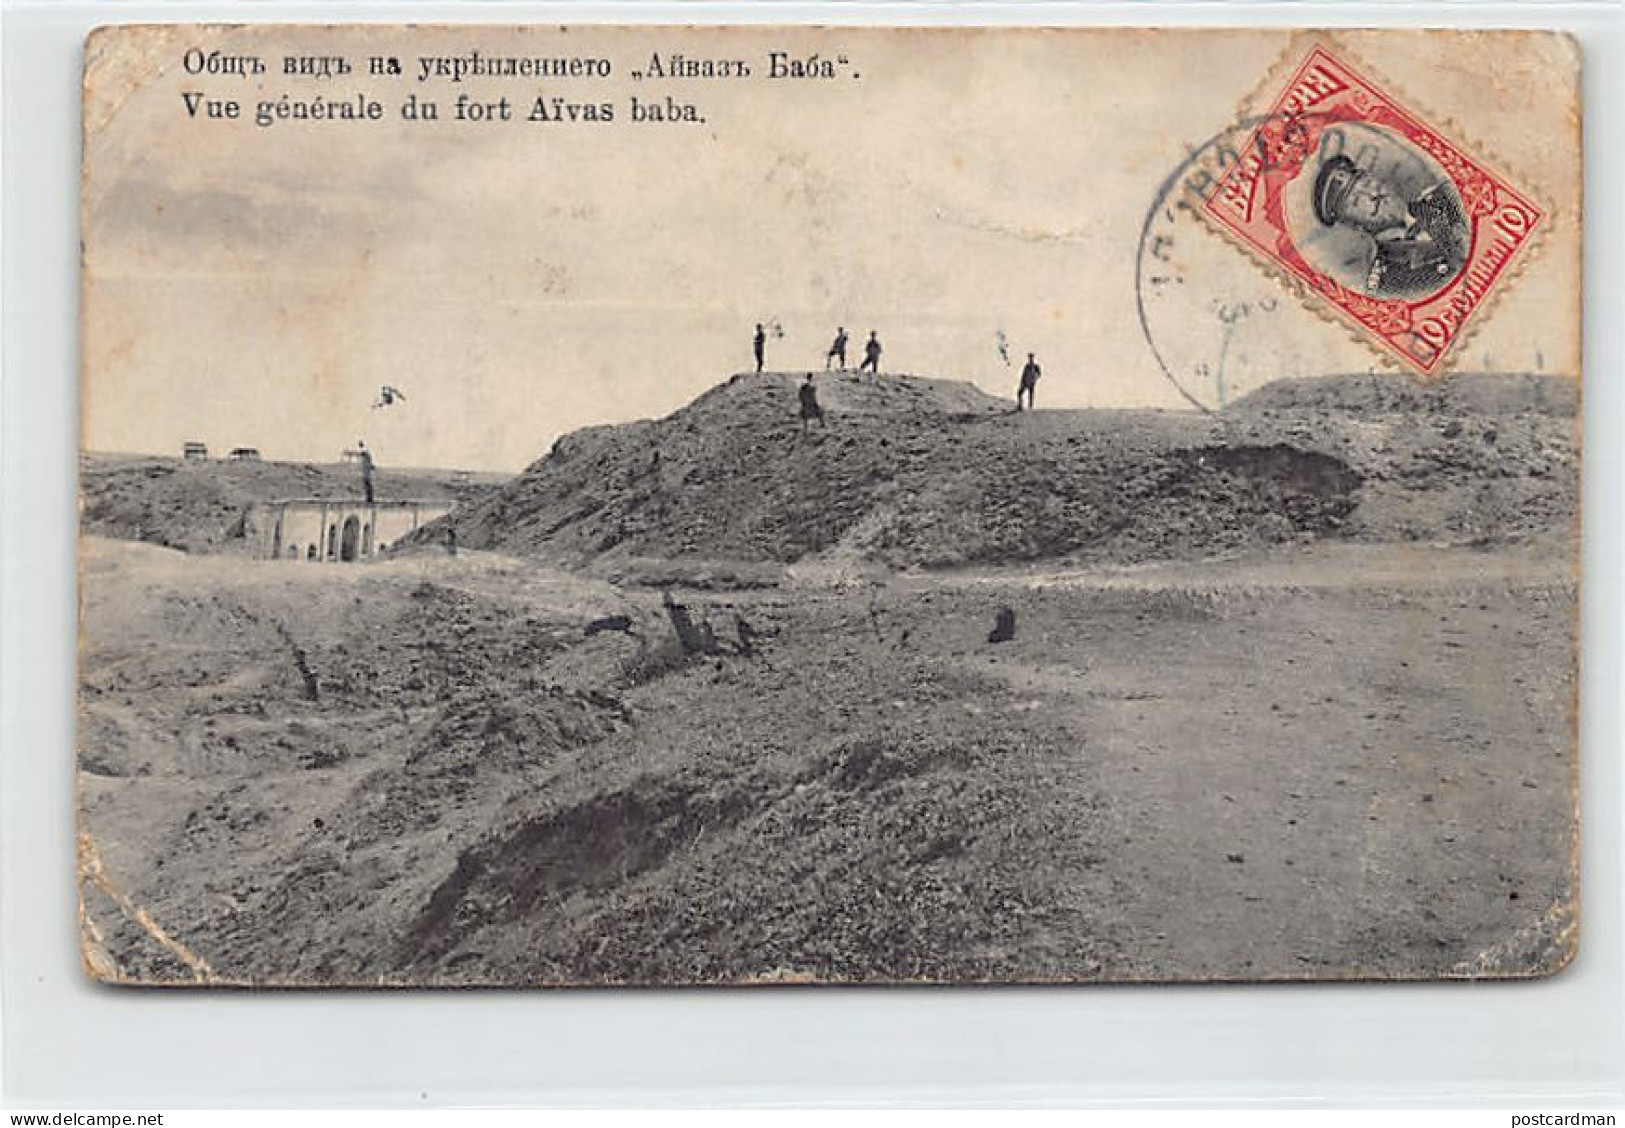 Turkey - EDIRNE - Ayvaz Baba Fort After The First Balkan War - SEE SCANS FOR CON - Turquie